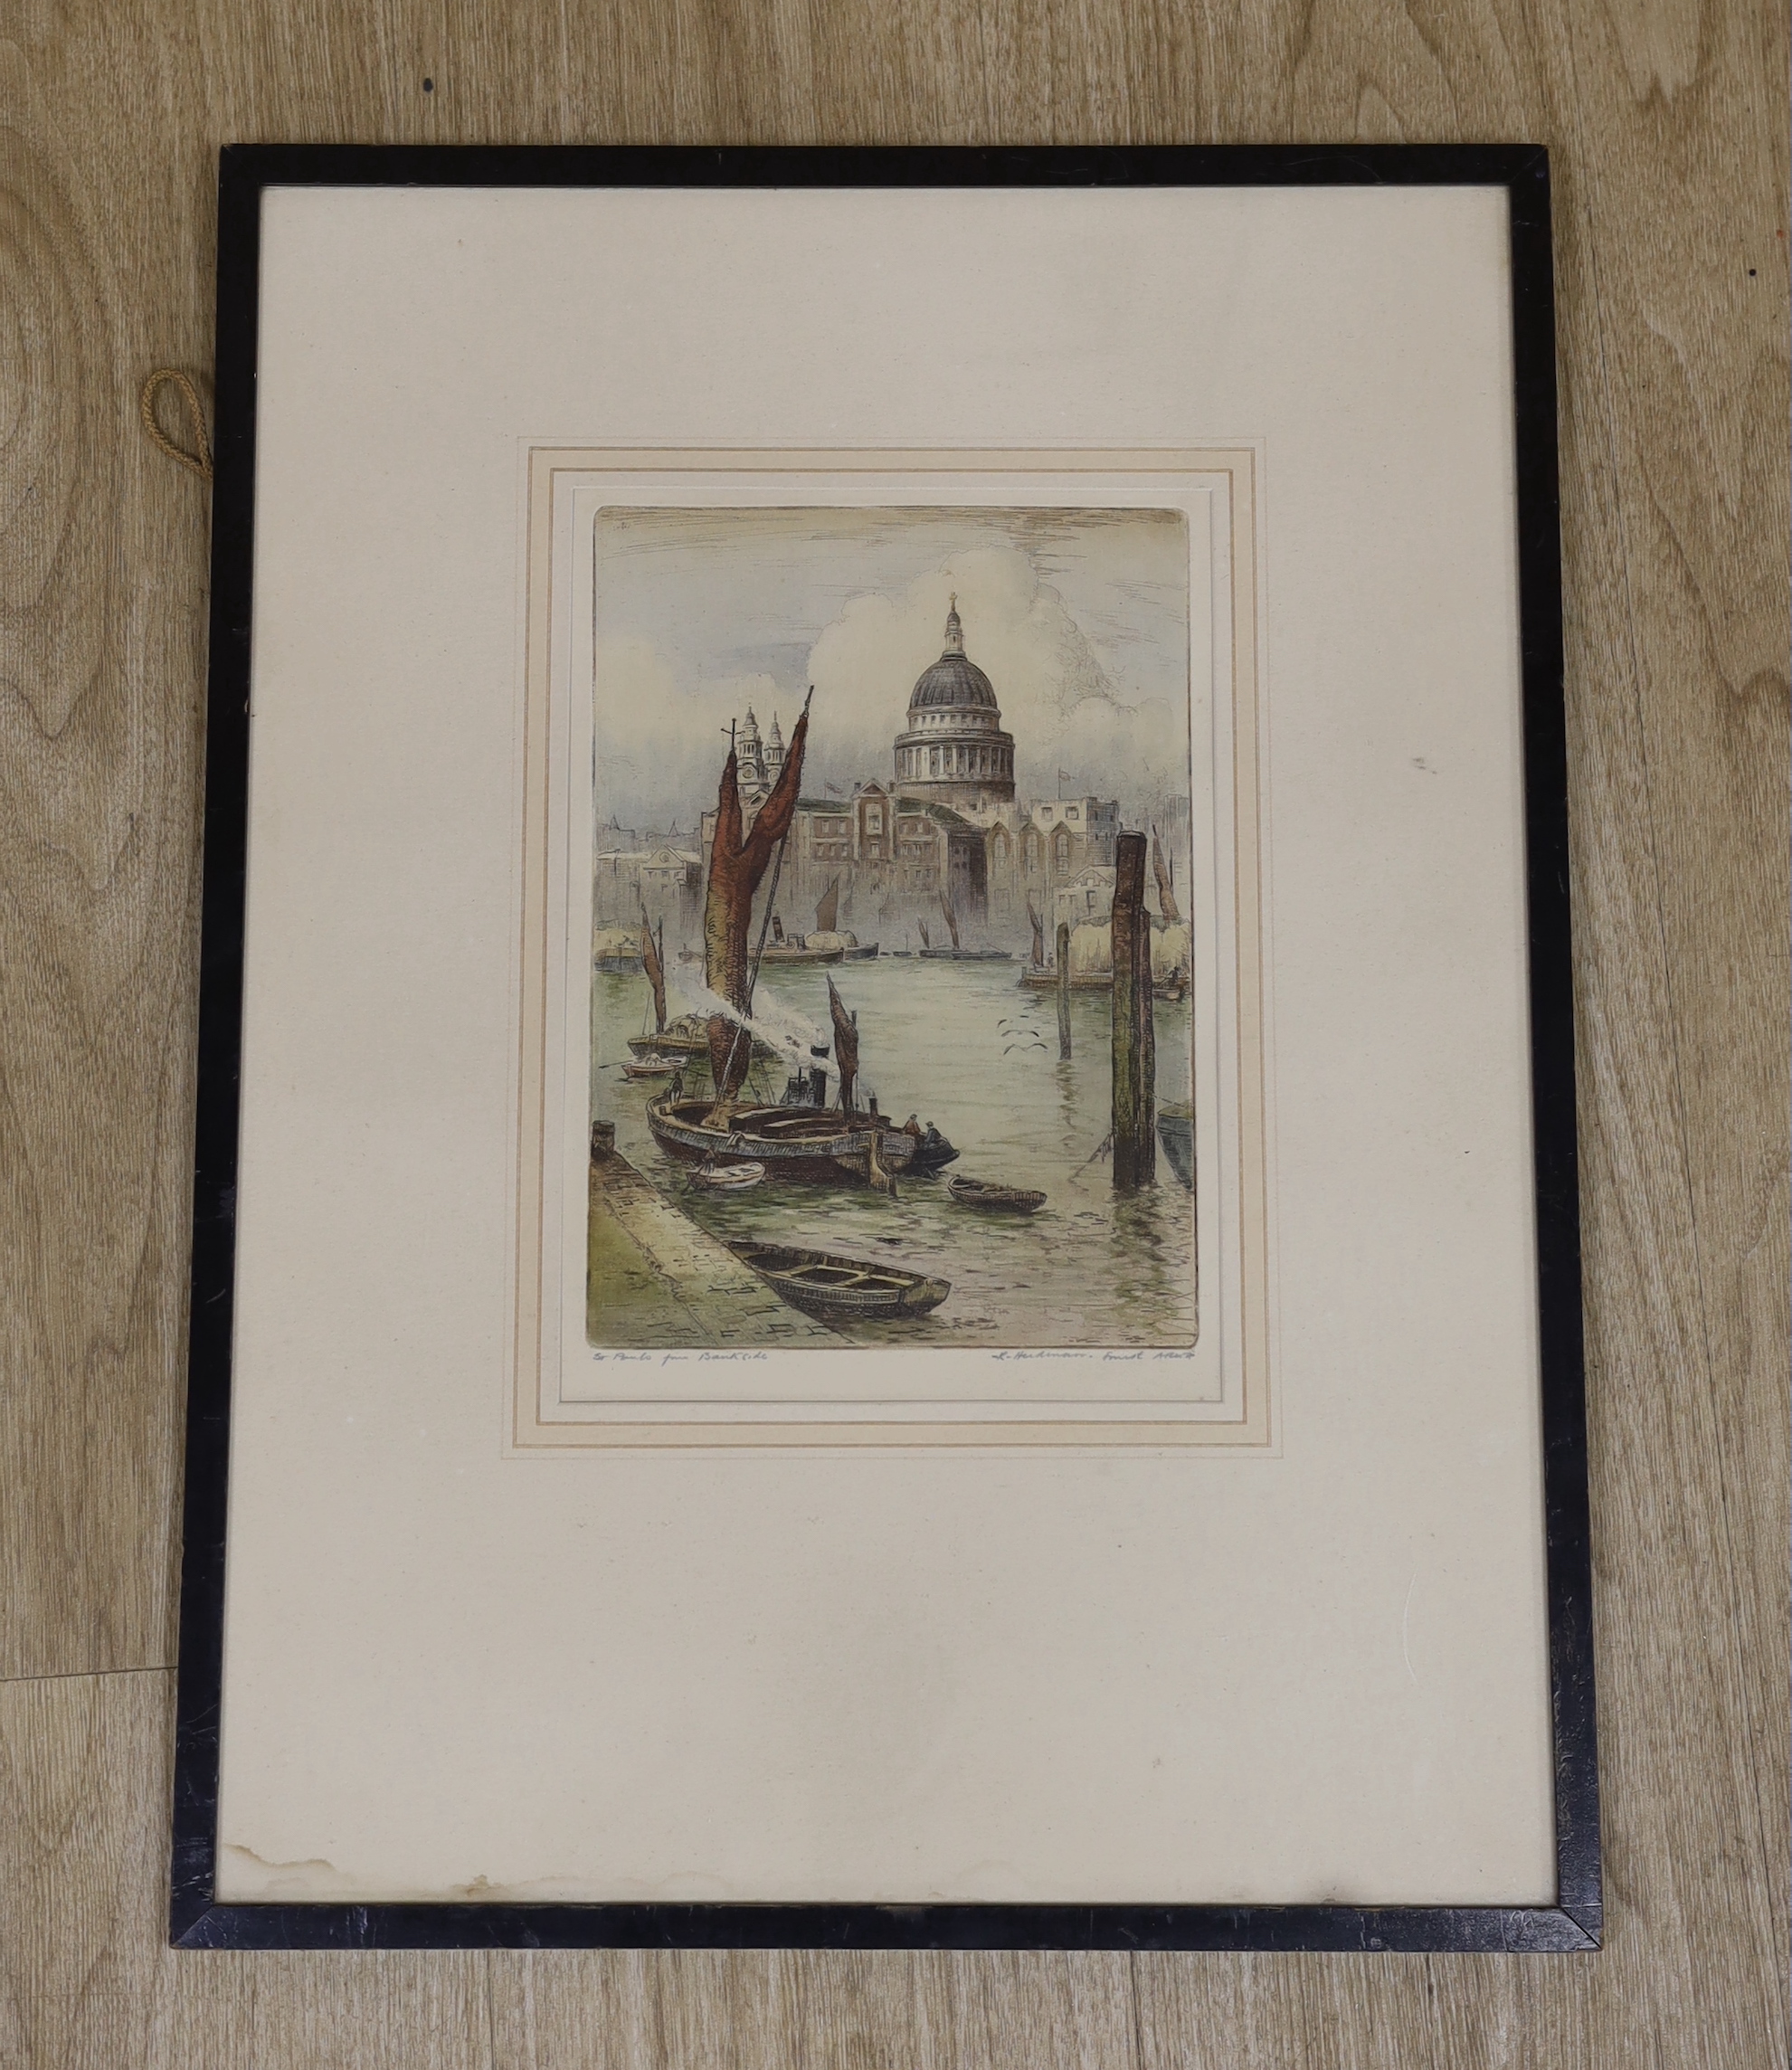 Robert Herdman-Smith (1879-1945), colour etching, 'St Paul's from Bankside', signed in pencil, 25 x 18cm